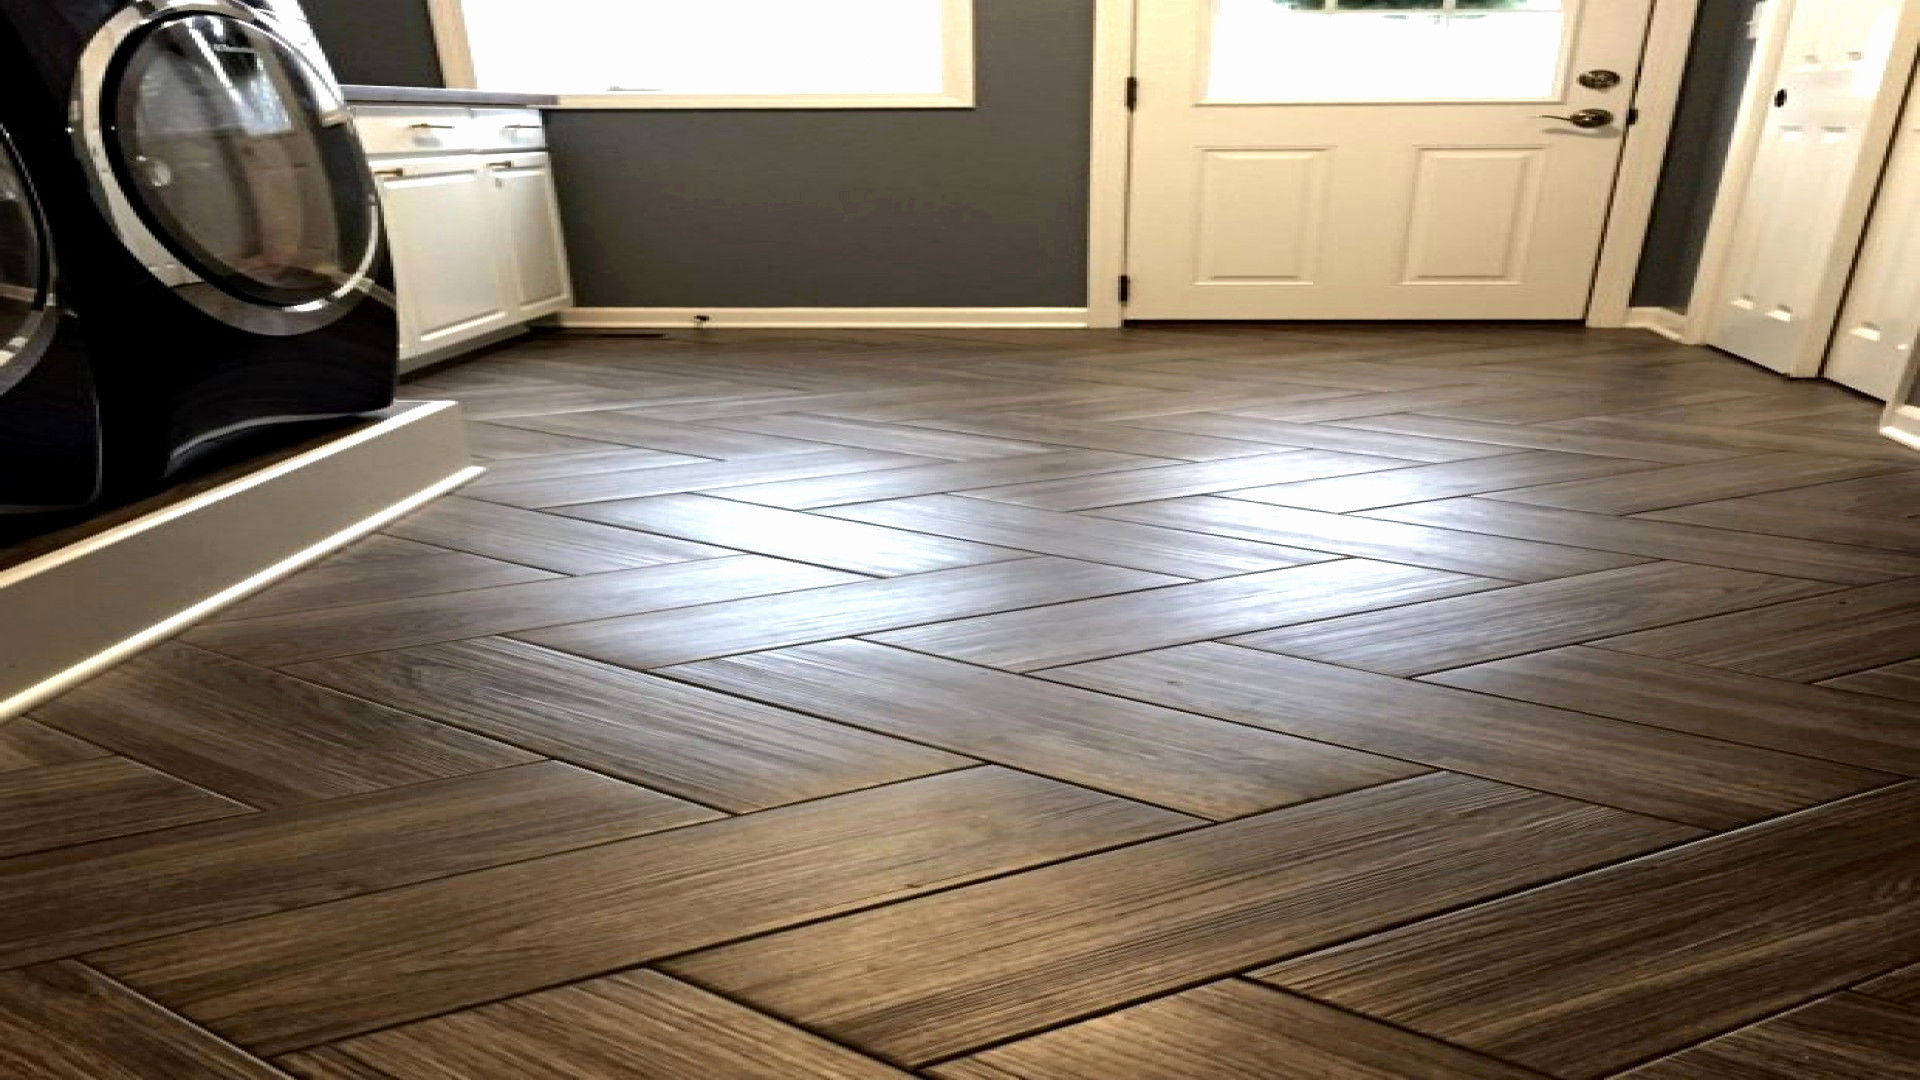 21 Stylish Pictures Of Hardwood and Tile Floors together 2024 free download pictures of hardwood and tile floors together of wood tile kitchen athomeforhire com in wood tile kitchen astonishing wood tile kitchen in addition to wood tile astonishing tile kitchen